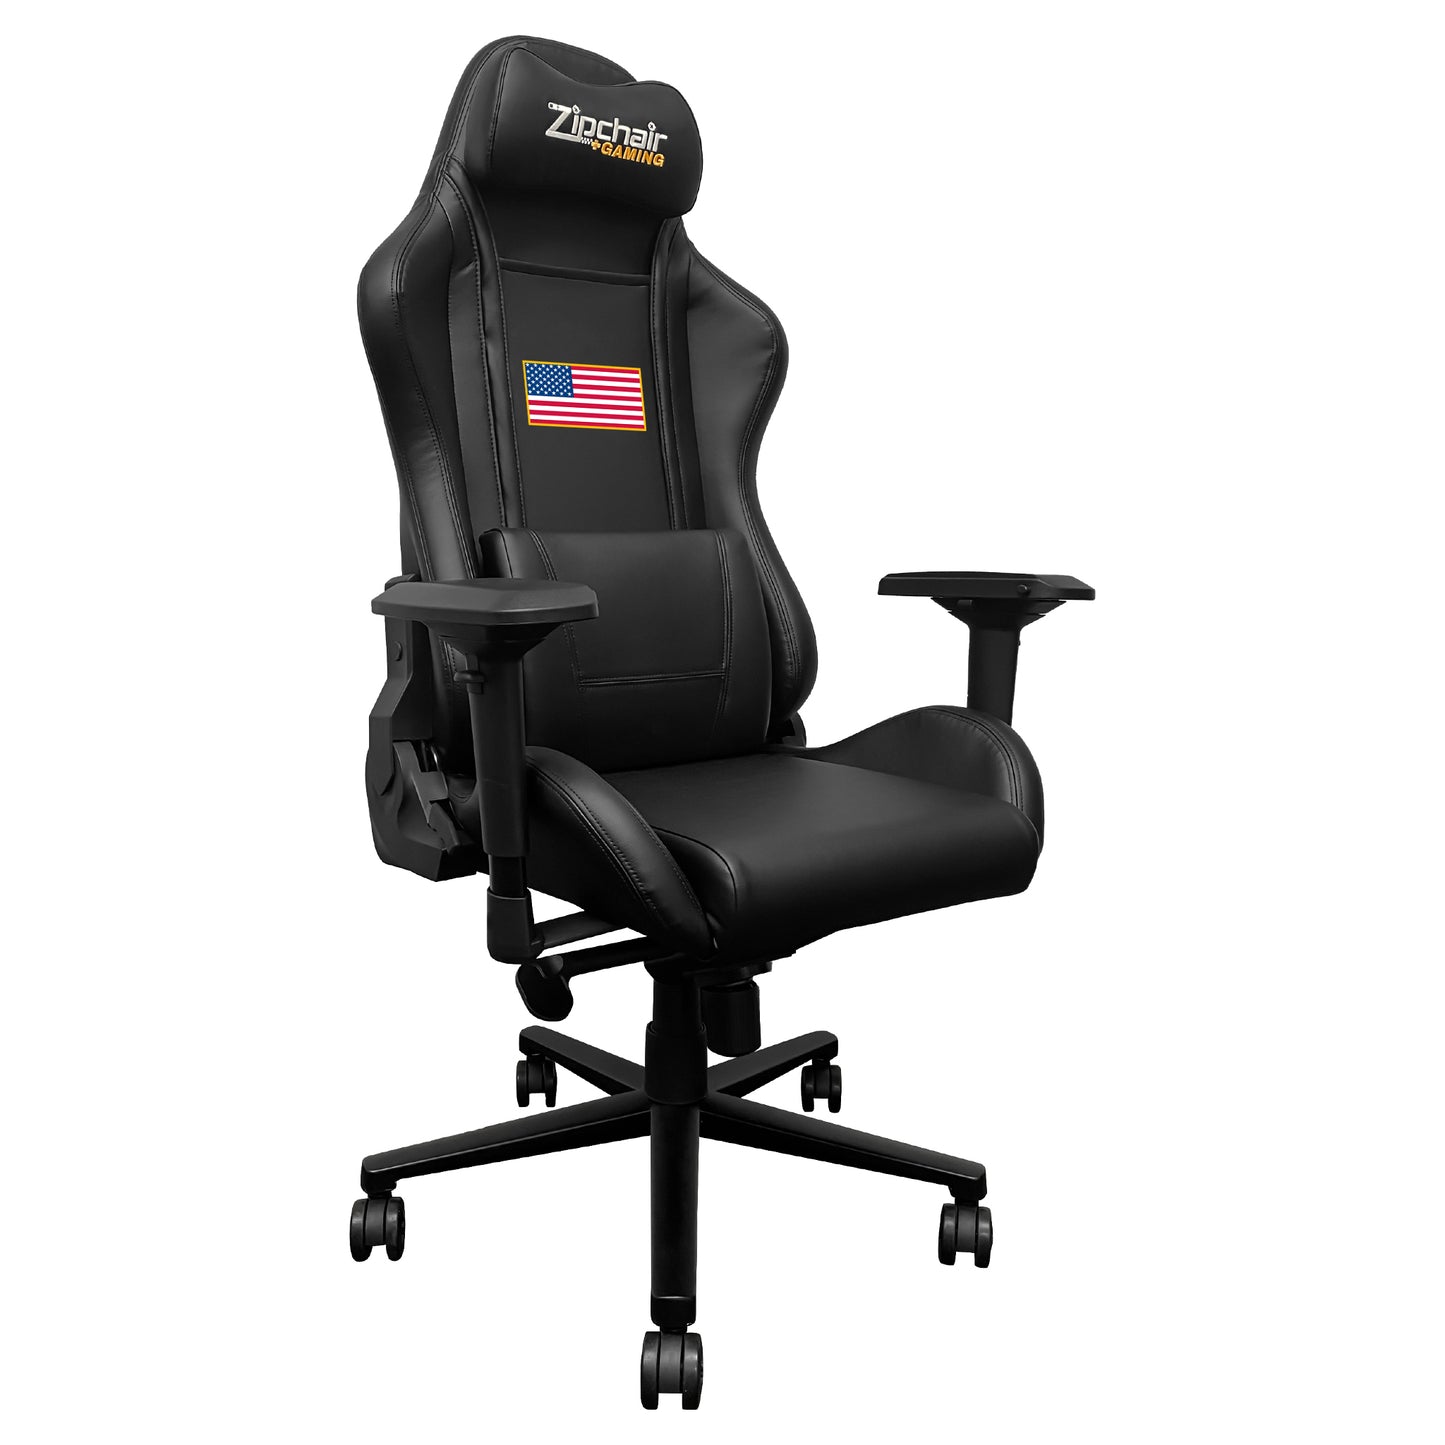 Xpression Pro Gaming Chair with American Flag Logo